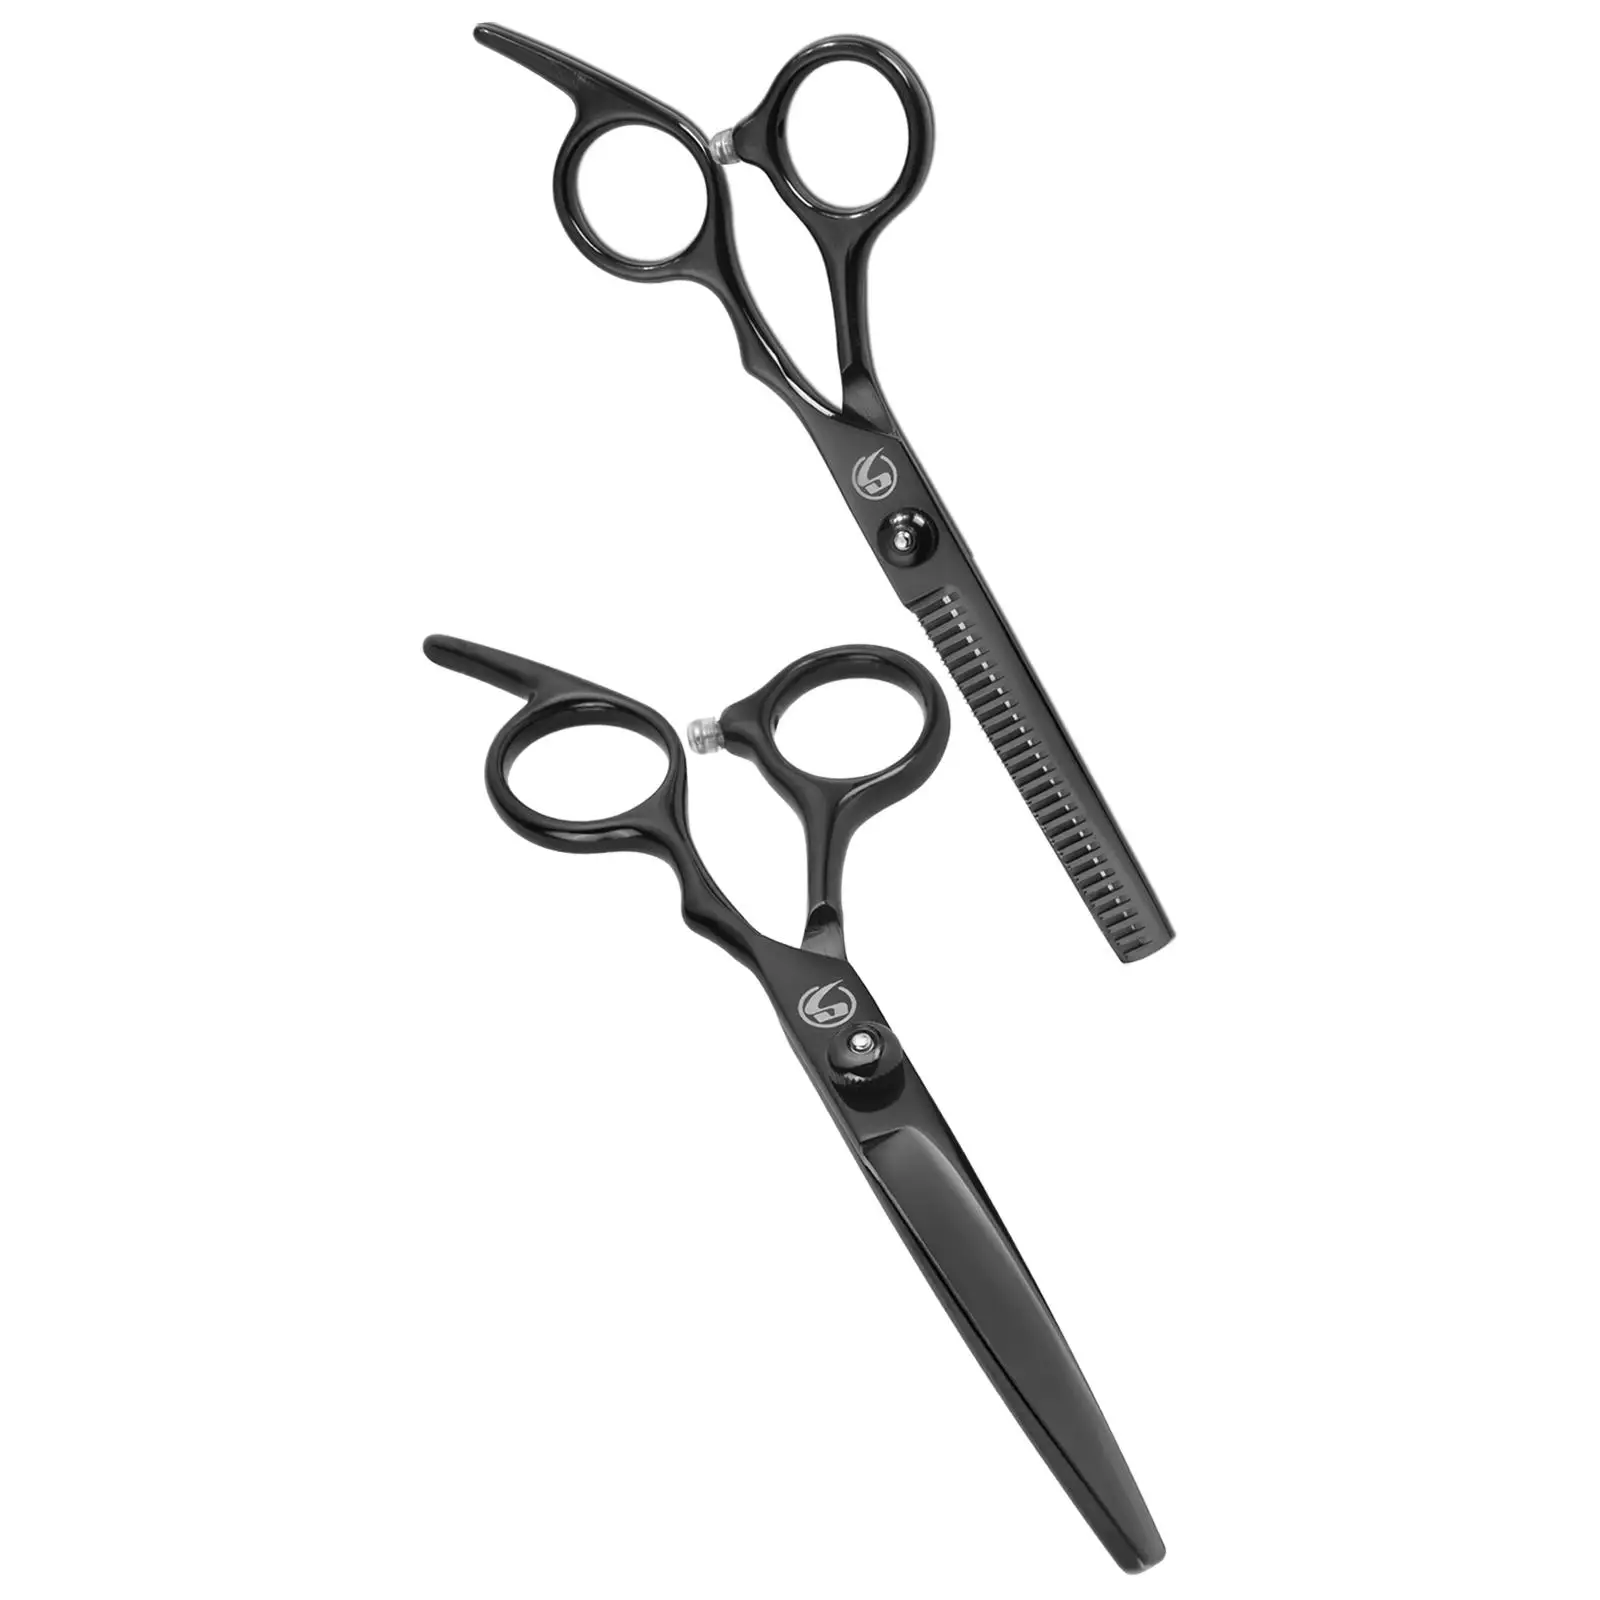 Hairdressing Scissors and Thinning Shears, Easy to Use Adjustable Screw Durable Material